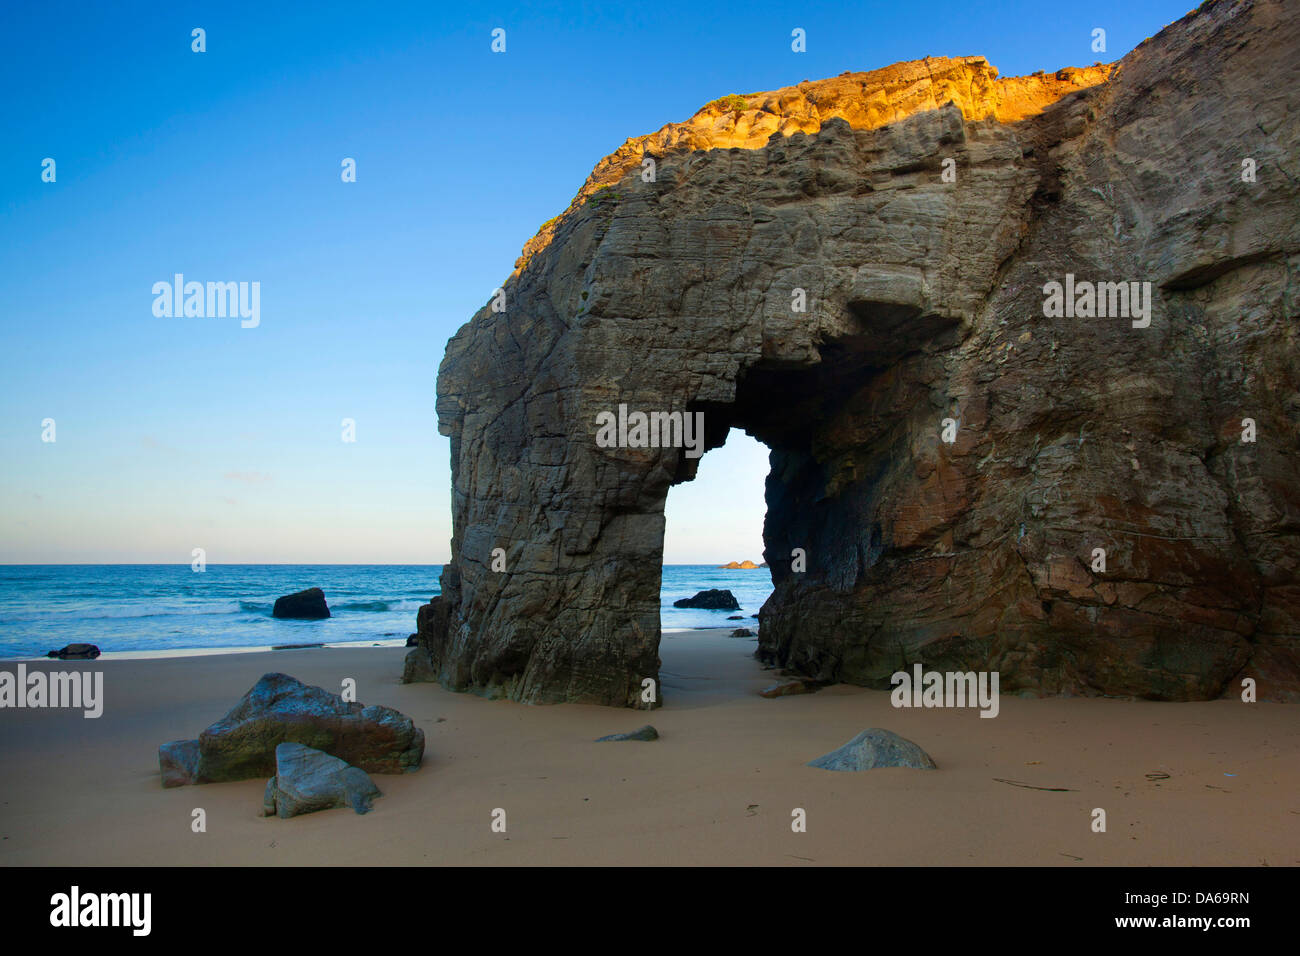 Côte Sauvage, France, Europe, Brittany, department Morbihan, coast, rock, cliff, rock formation, arc, sea, morning light Stock Photo